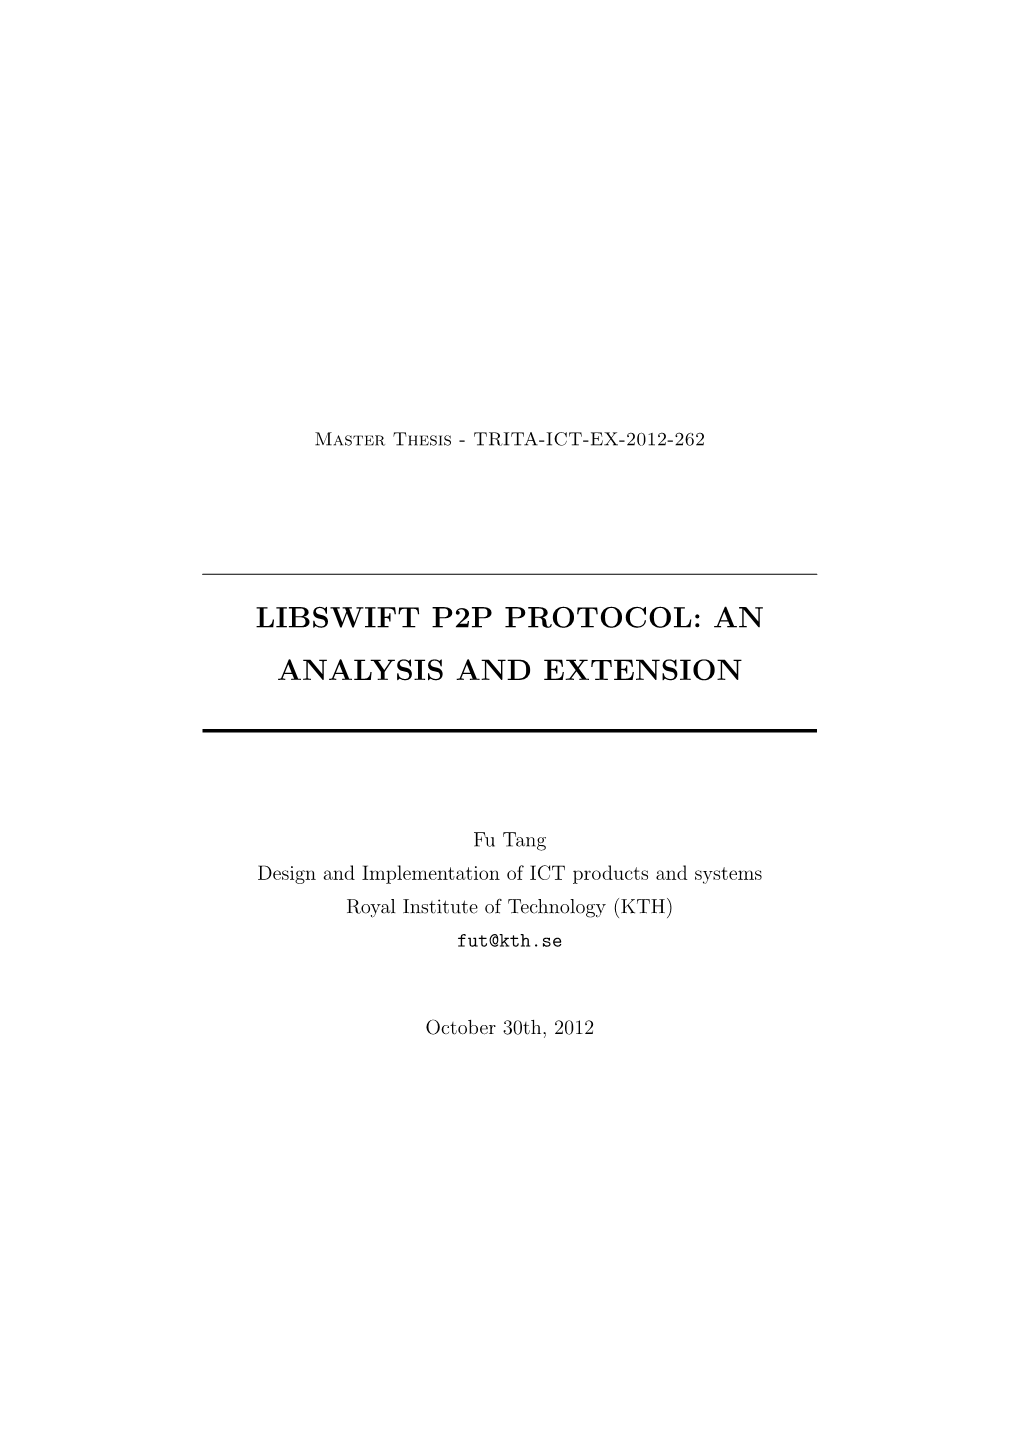 Libswift P2p Protocol: an Analysis and Extension